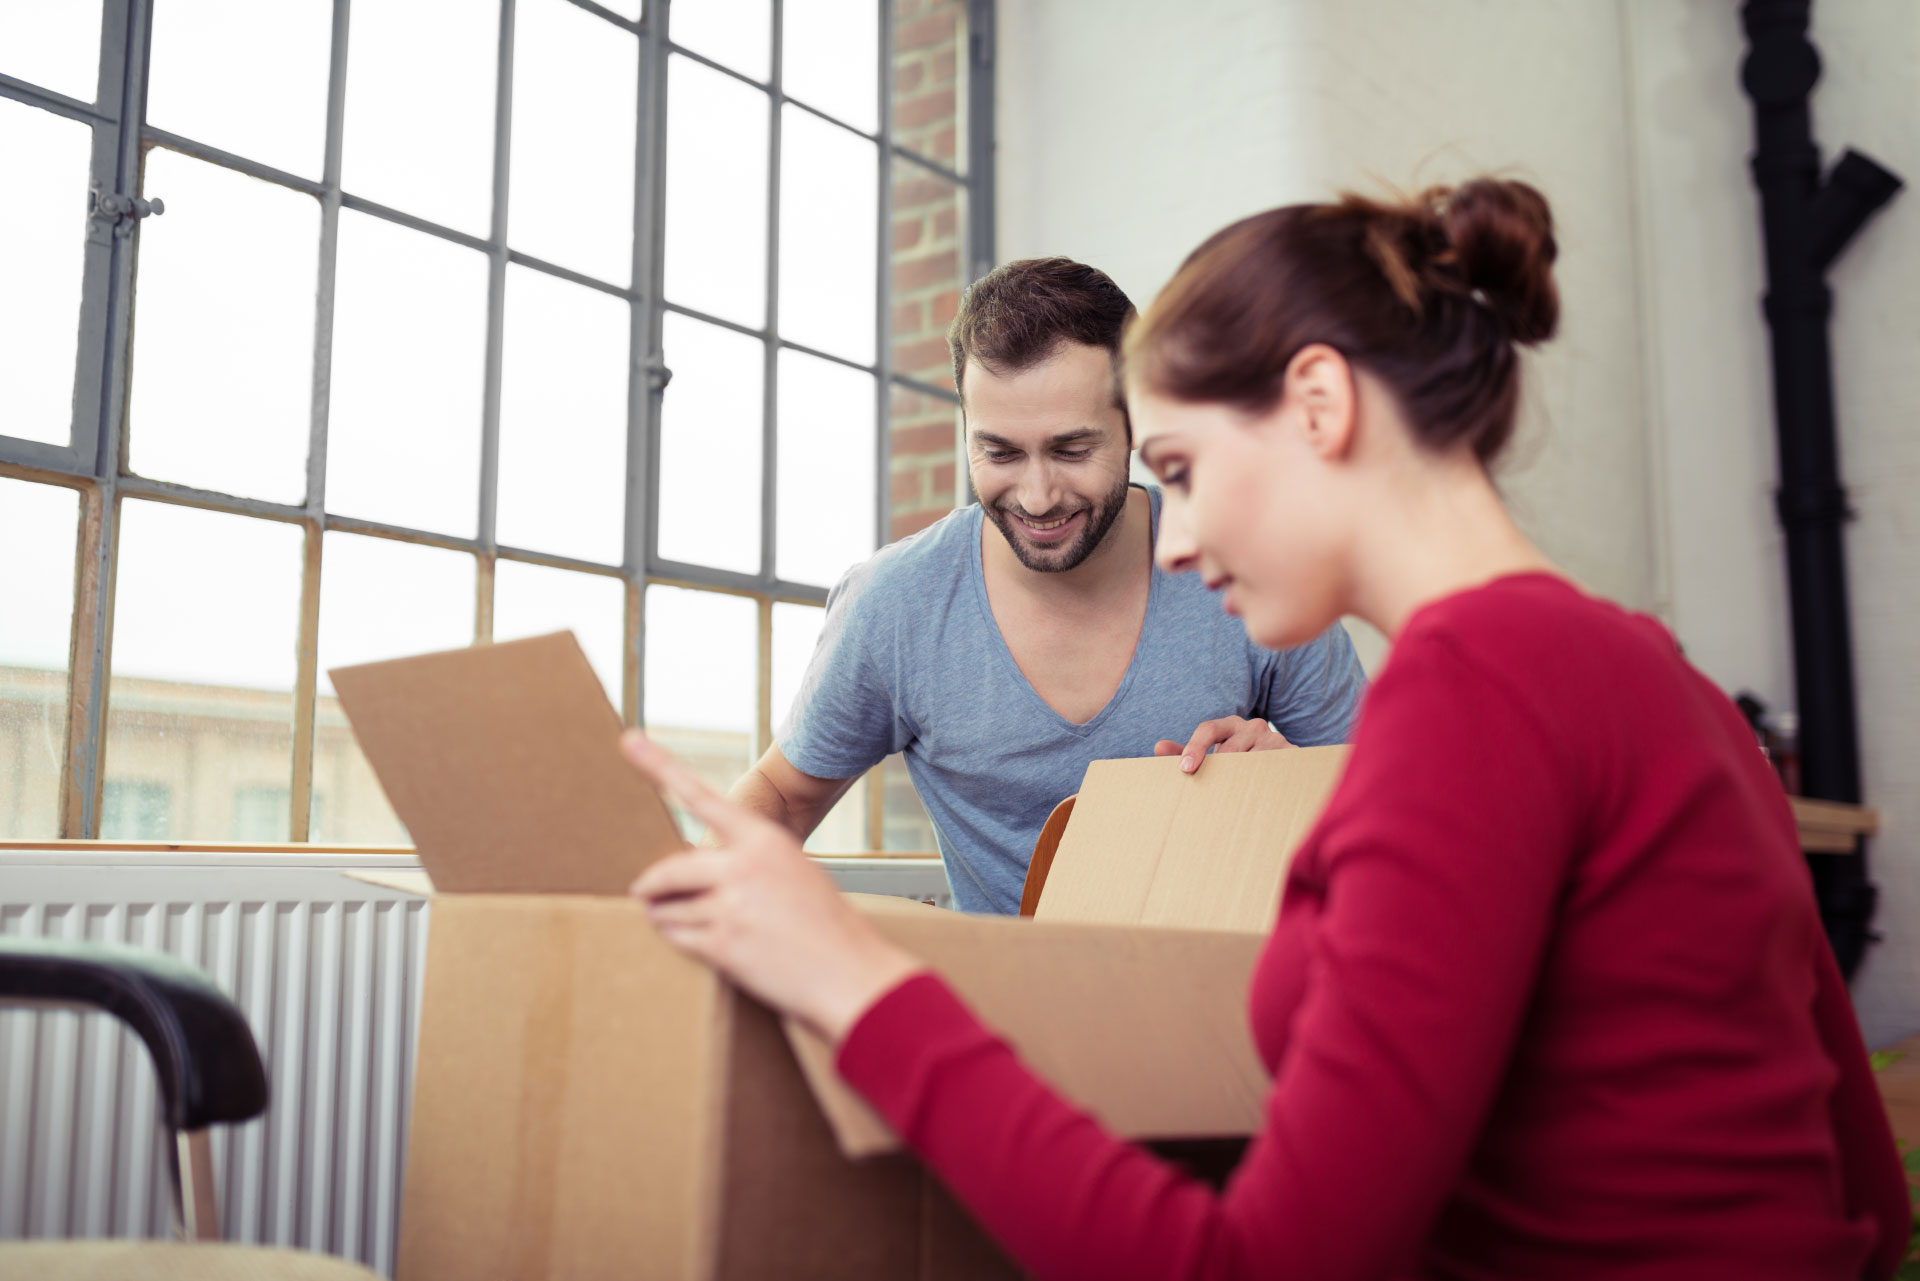 Top Tips for Moving Home